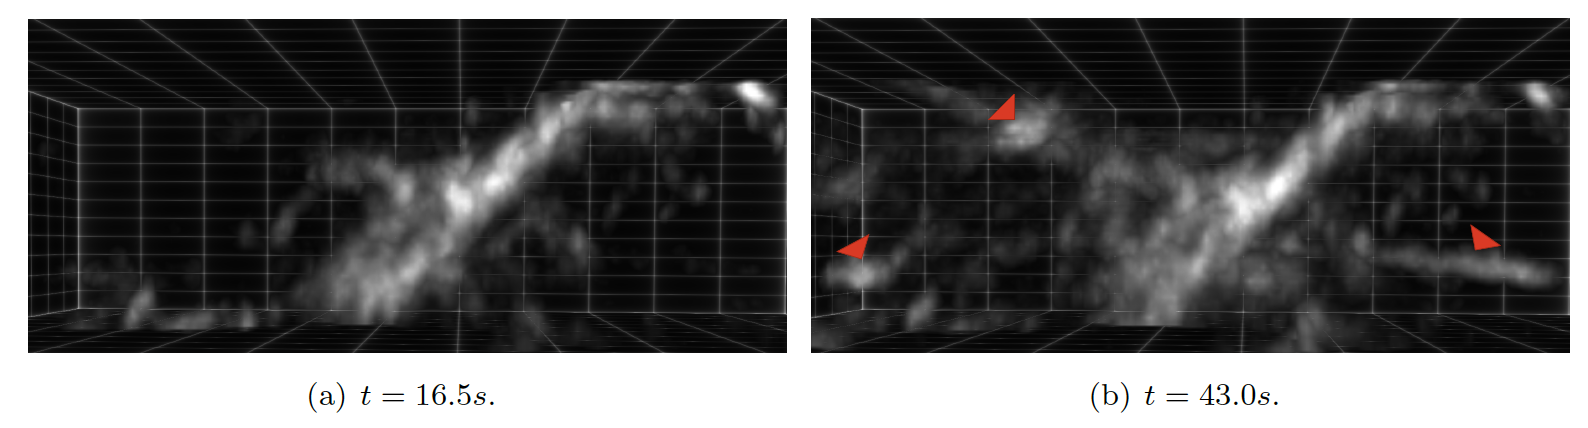 3D views of astrocytic calcium signals in real 3D+time LLSM images. Red triangles: changes in calcium signals.Voxelsize: 0.1025×0.1025×0.1066μm30.1025 \times 0.1025 \times 0.1066 \; \mathrm { \mu m}^3. Acquisition frequency: 2Hz (Source: M. Arizono, M. Ducros, U. V. Nägerl, Interdisciplinary Institute for Neuroscience, Bordeaux).